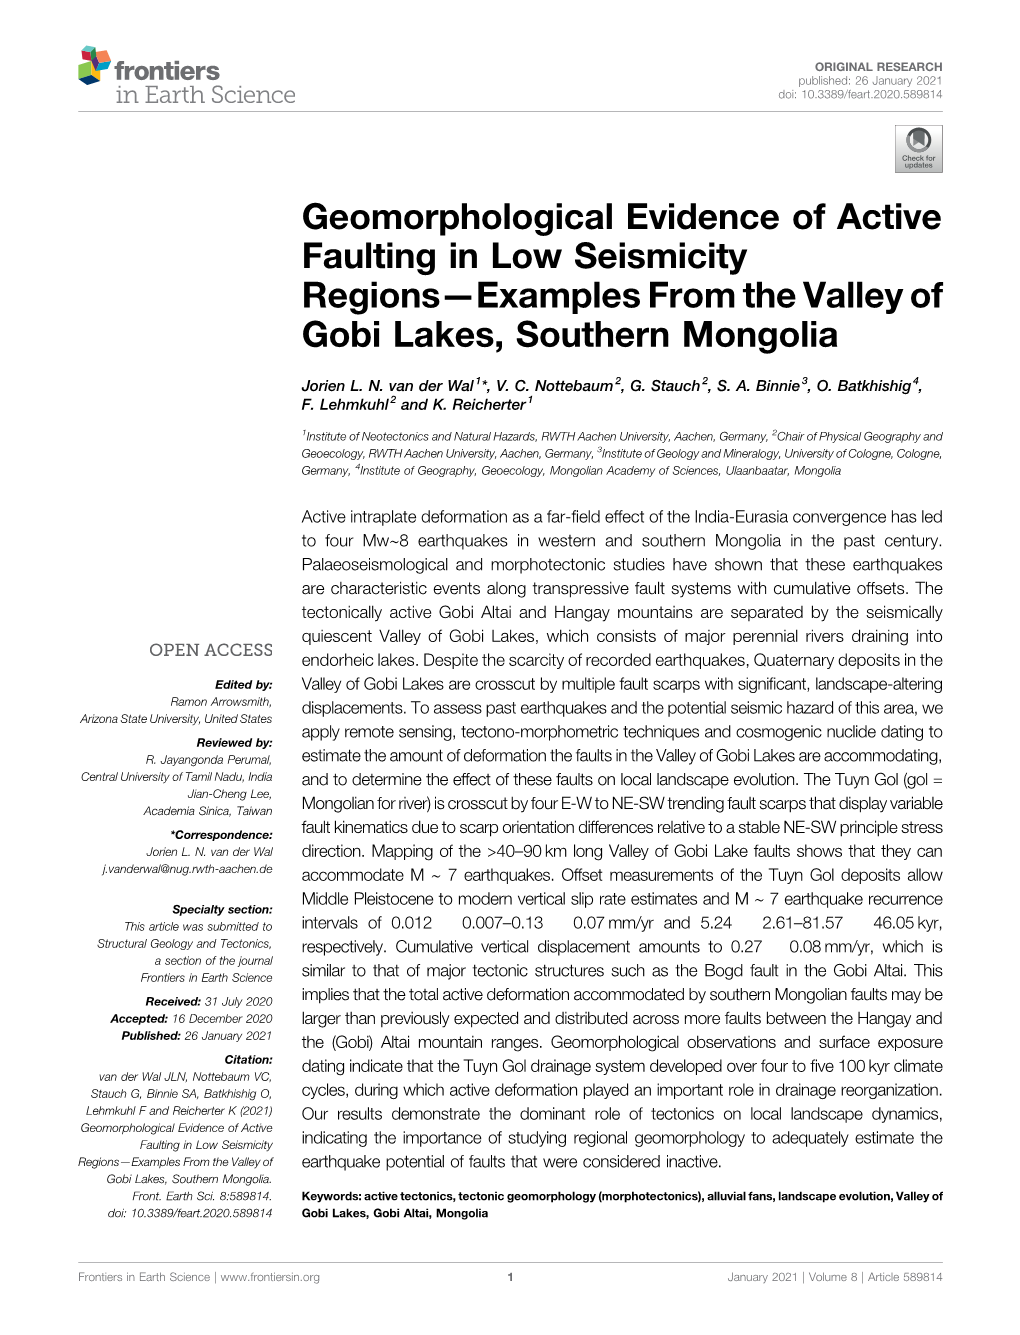 Geomorphological Evidence of Active Faulting in Low Seismicity Regions—Examples from the Valley of Gobi Lakes, Southern Mongolia